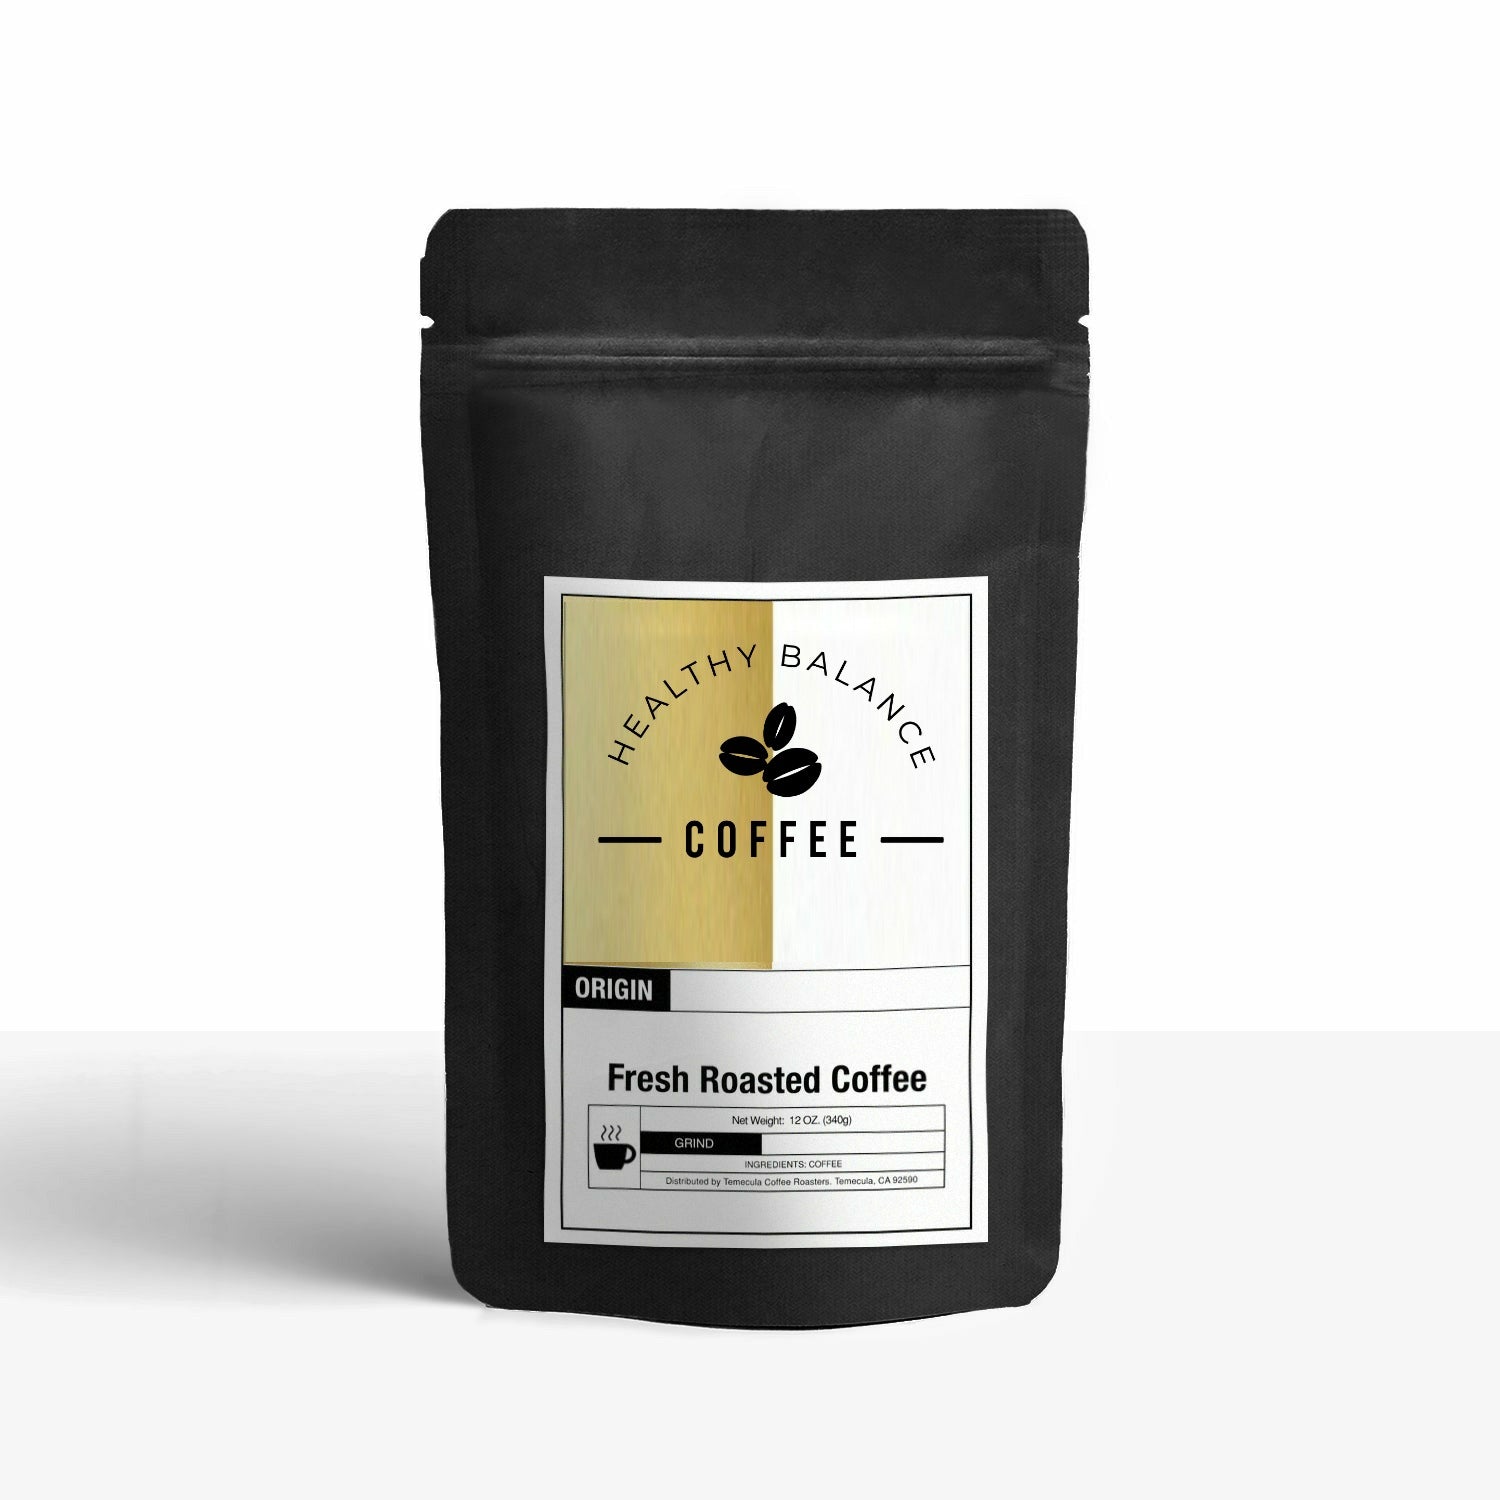 Holiday Blend - Healthy-Balance Coffee Roasters 